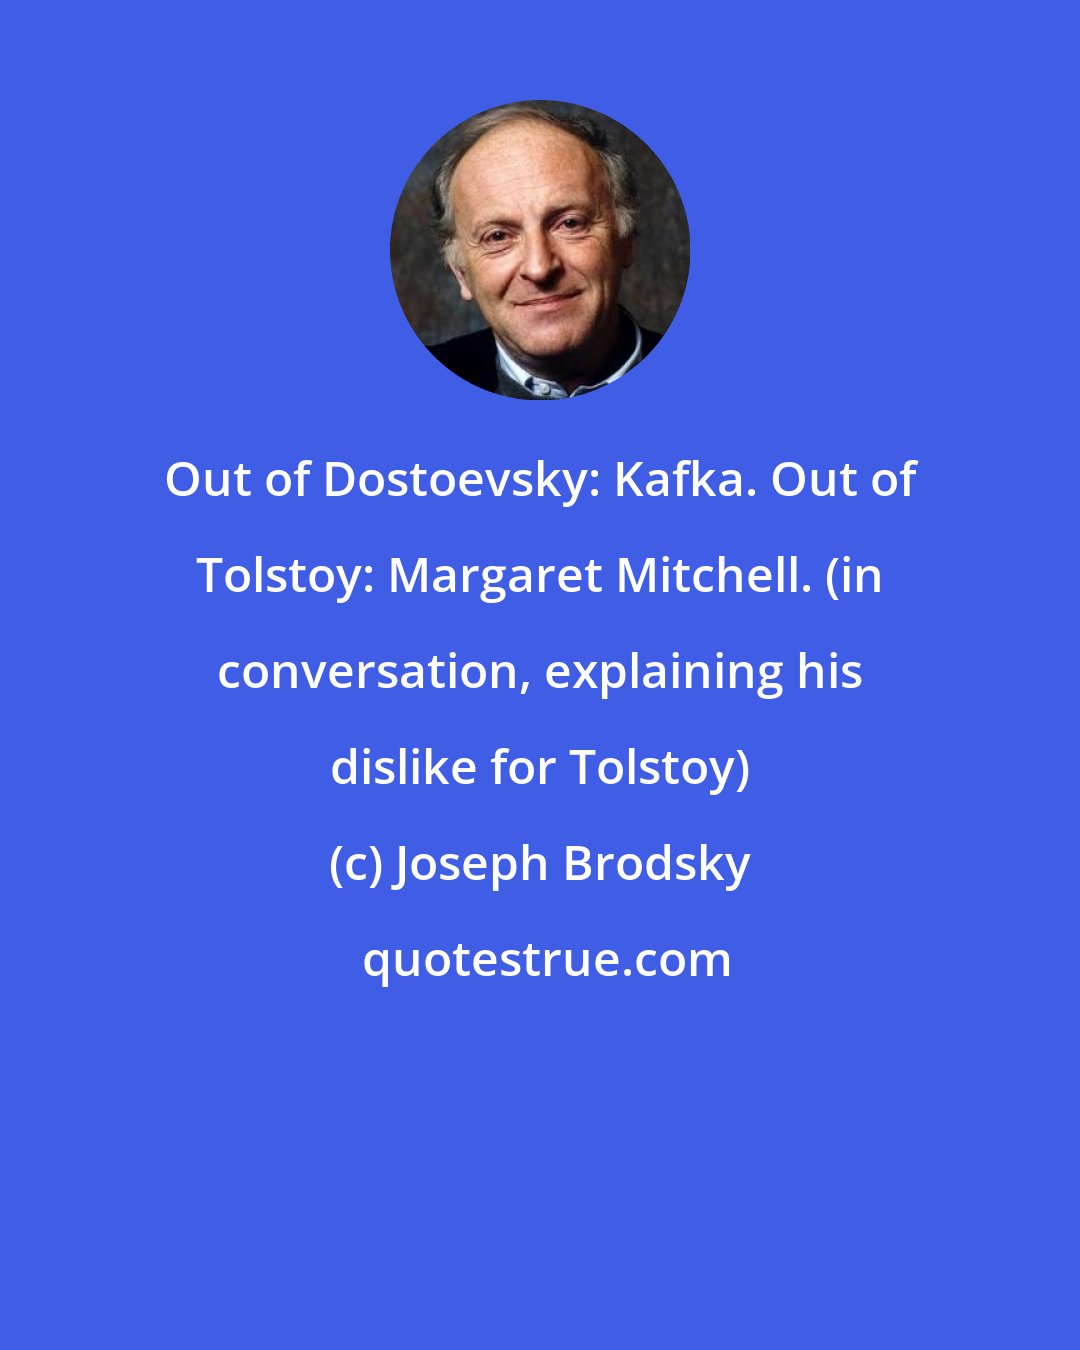 Joseph Brodsky: Out of Dostoevsky: Kafka. Out of Tolstoy: Margaret Mitchell. (in conversation, explaining his dislike for Tolstoy)